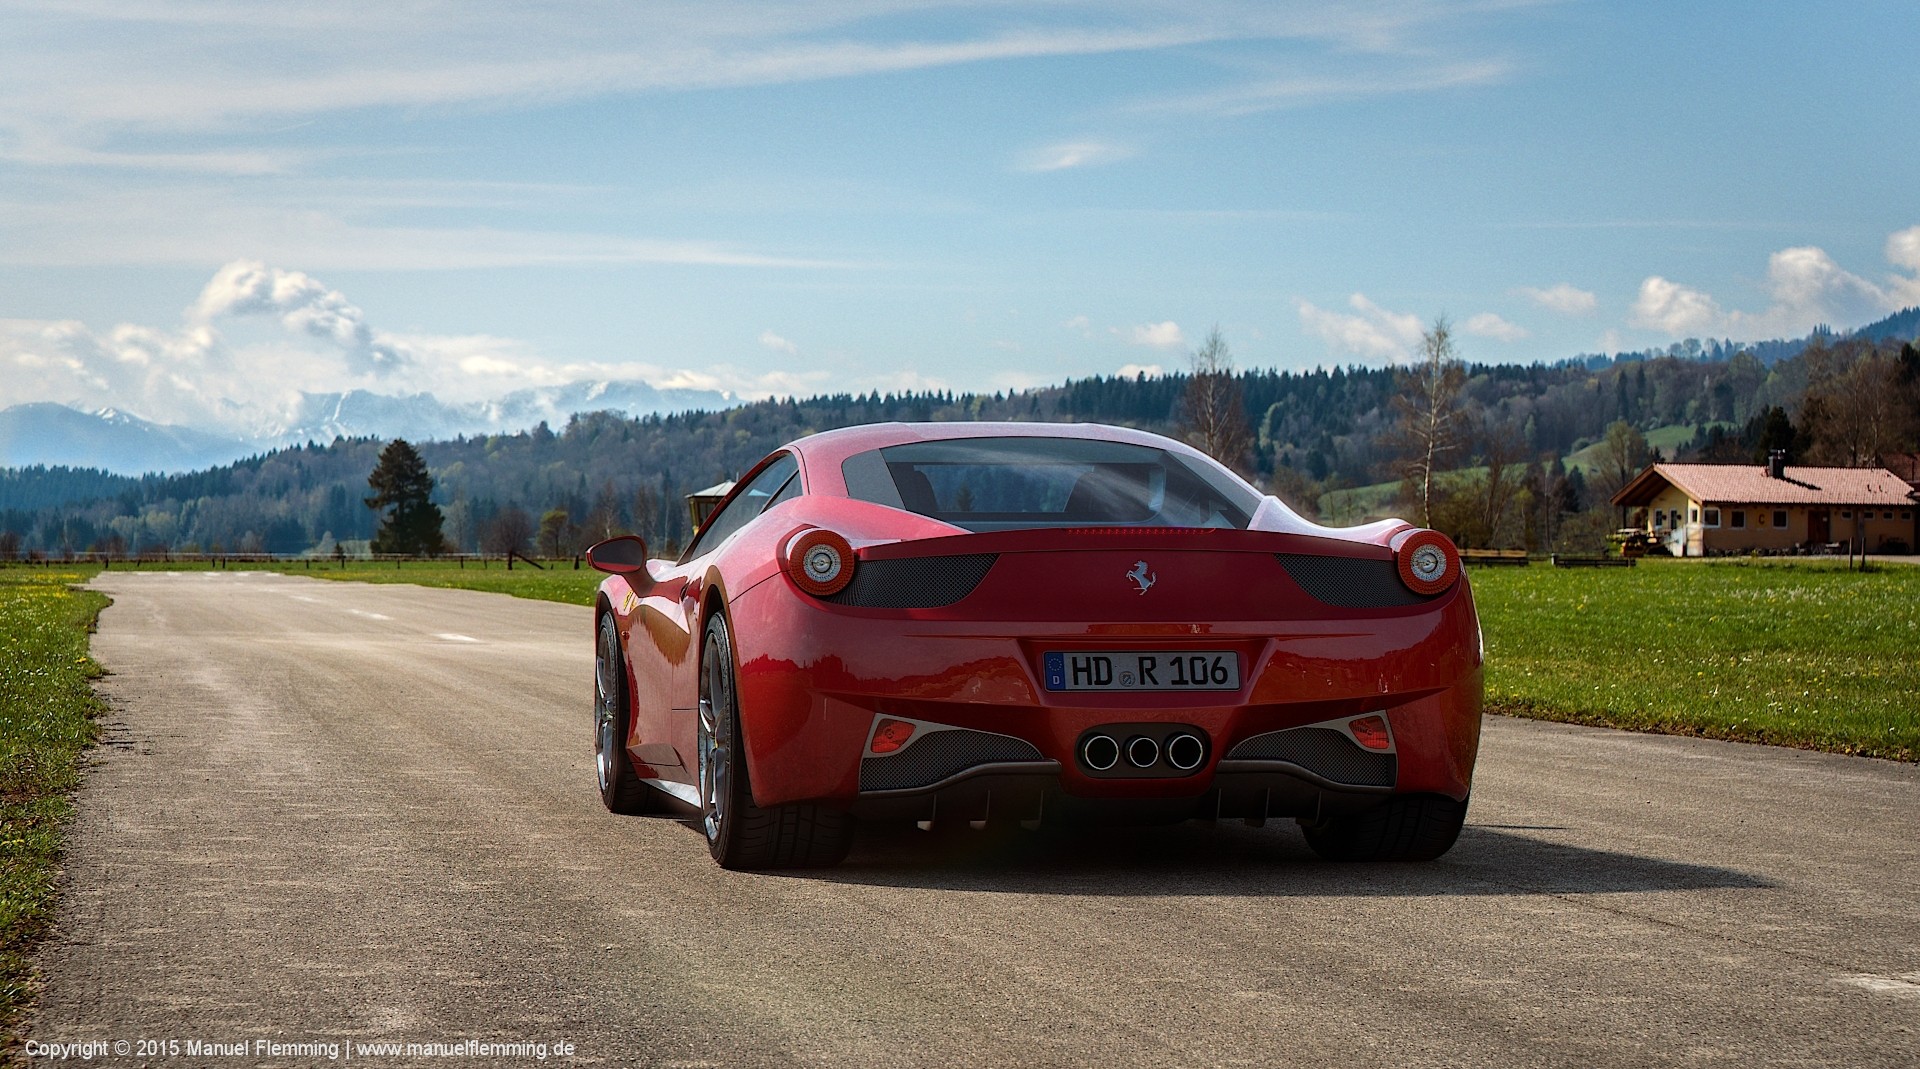 A rendering of a Ferrari F458 at Airstrip 02 - created using Maya, Mari, Vray and Nuke. I'm responsible for HDRI & Plate photography, texturing, shading, lighting, rendering and compositing.